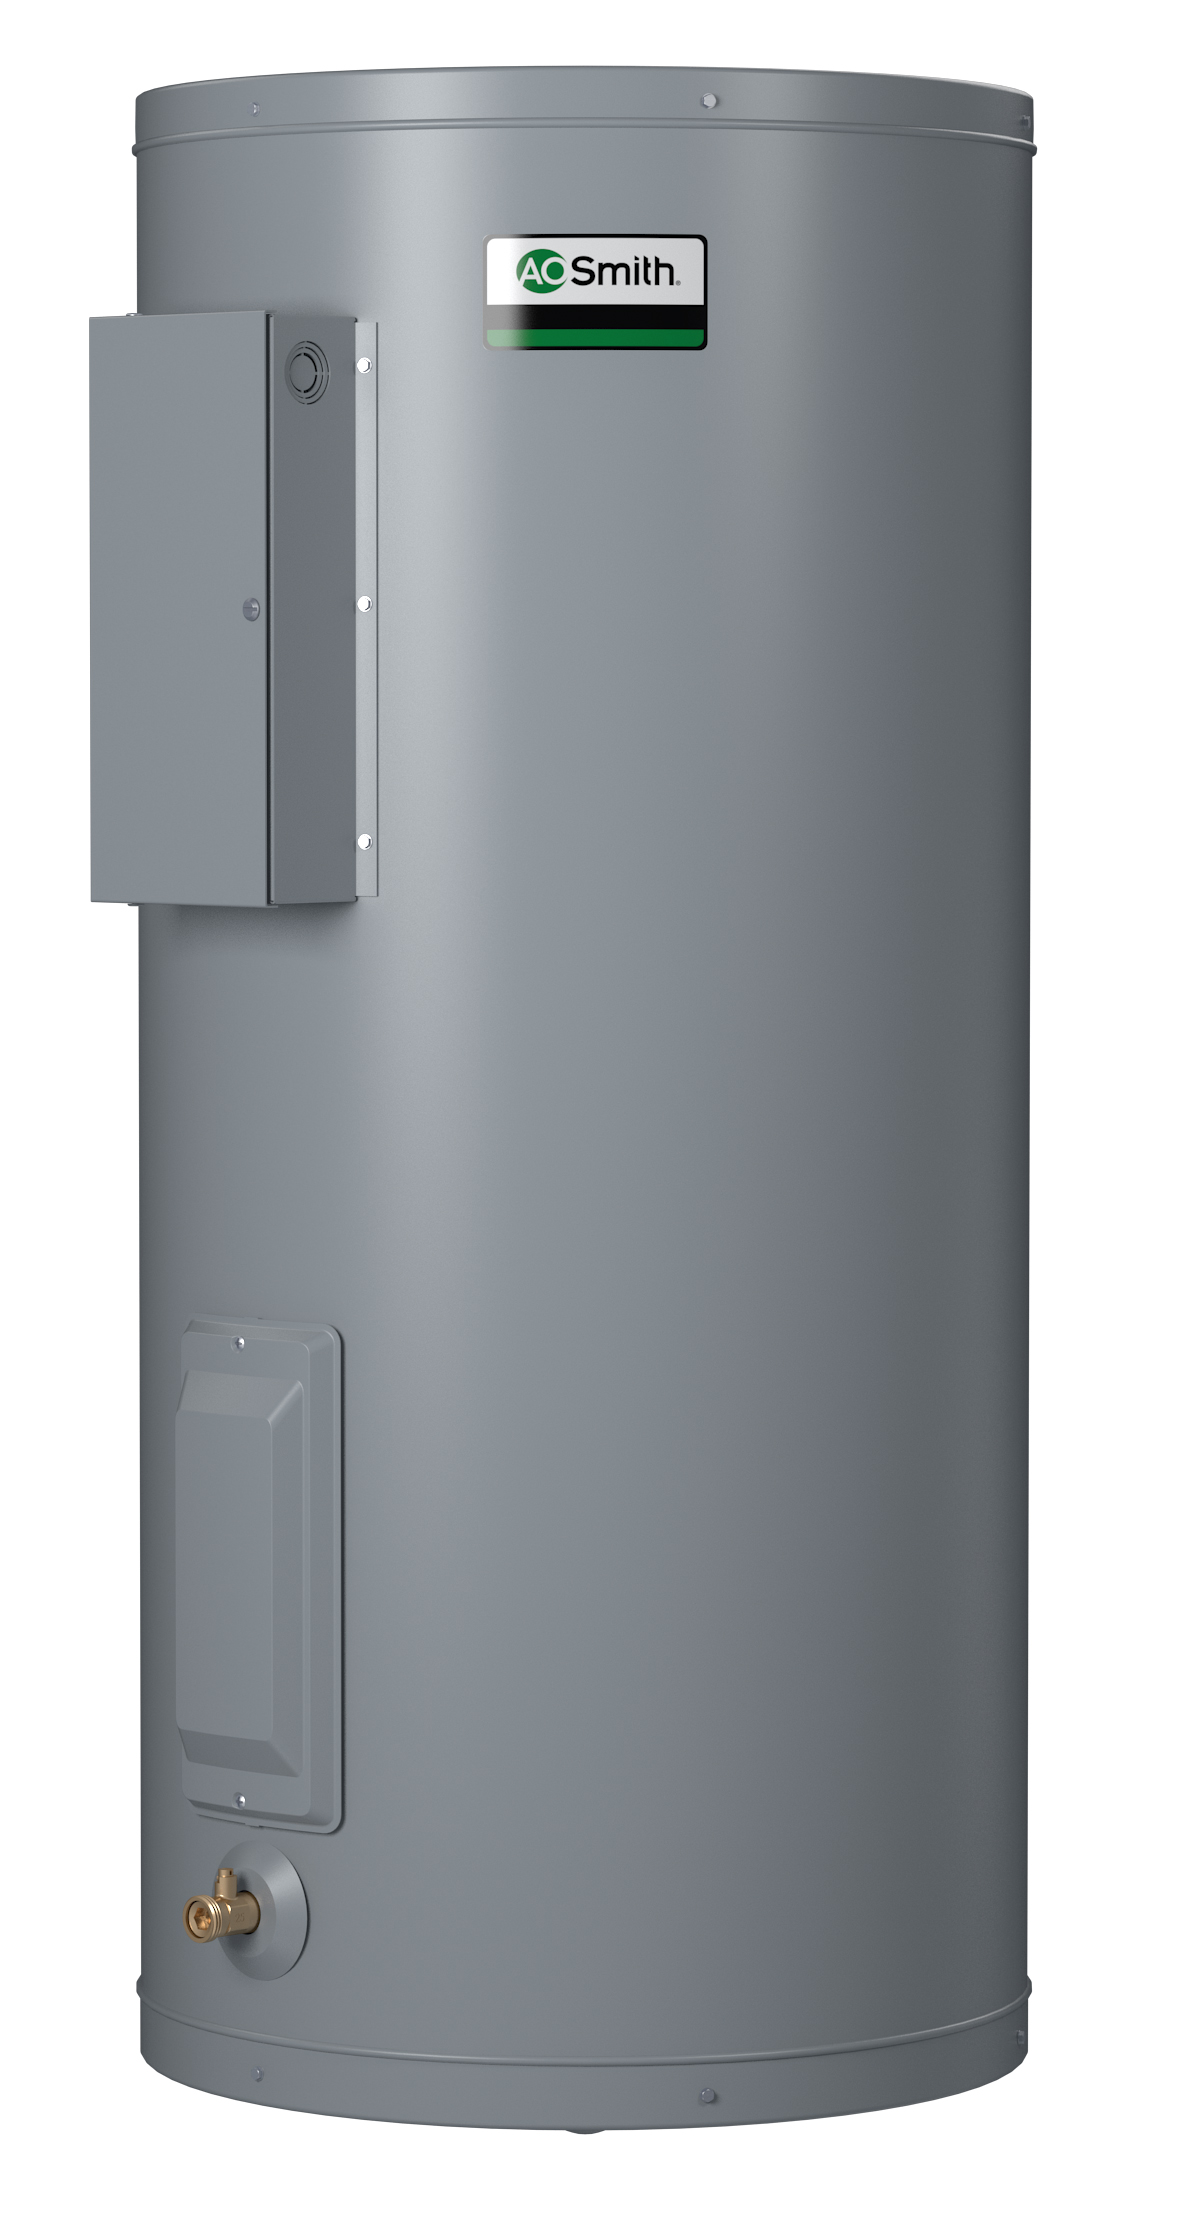 AO SMITH DEN-80D: 80 GALLONS, 9.0KW, 240 VOLT, 3 PHASE, (2-4500 WATT ELEMENTS, SIMULTANEOUS WIRING), DURA-POWER, LIGHT DUTY COMMERCIAL ELECTRIC WATER HEATER